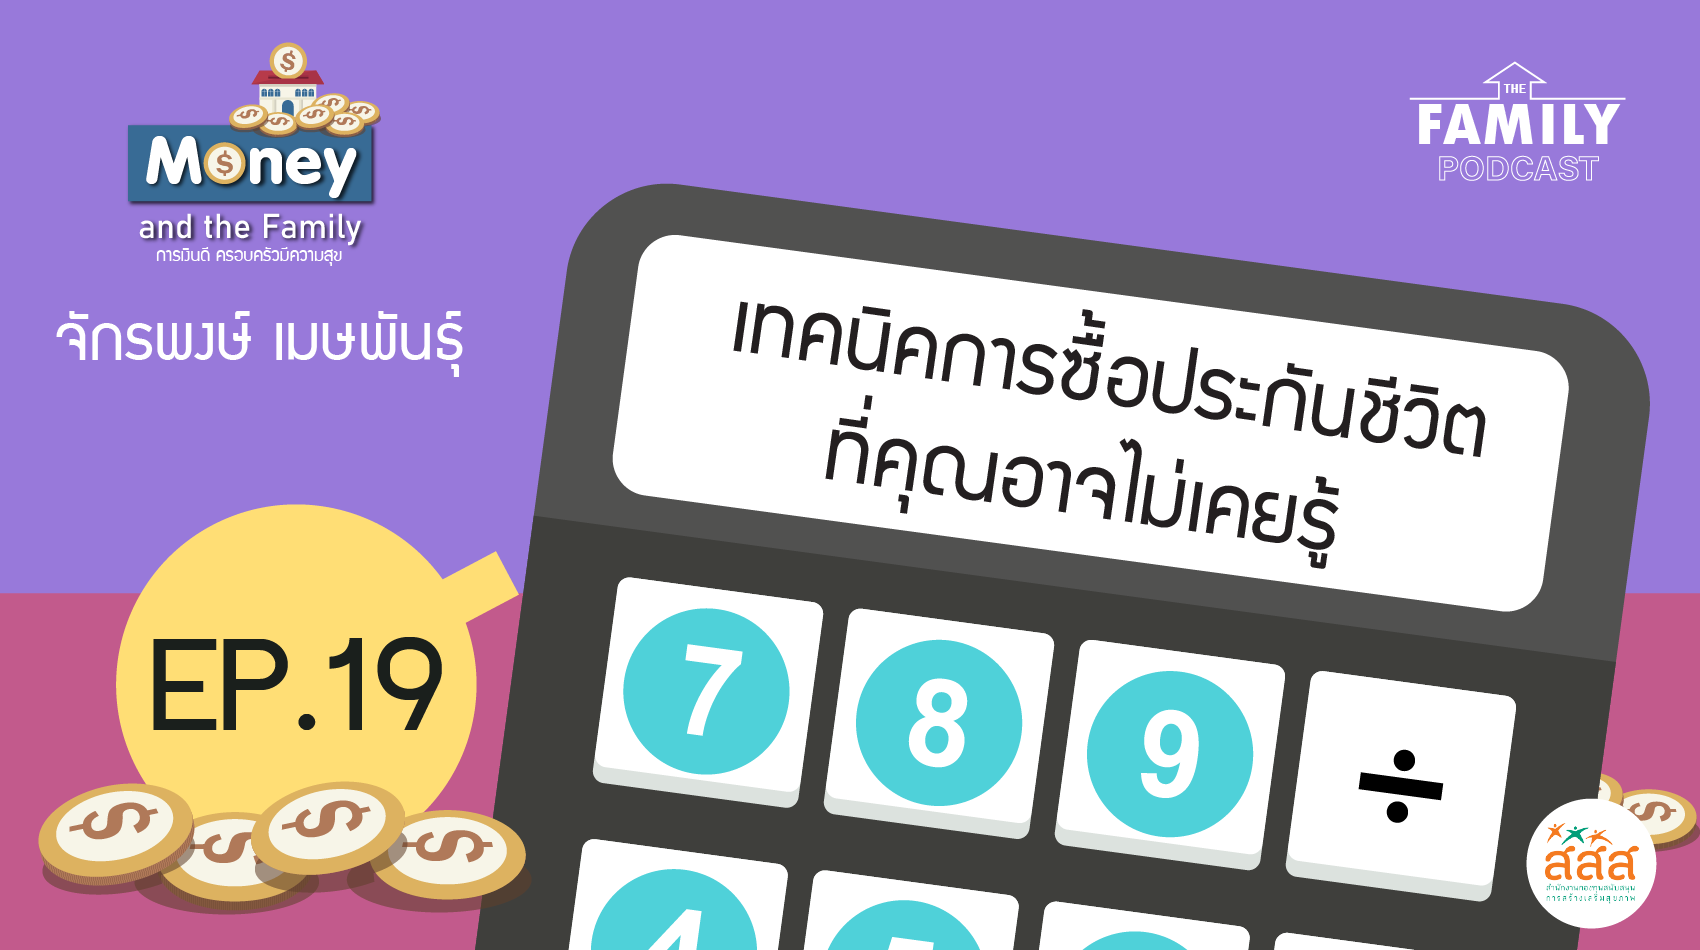 The Family Podcast Money and the Family EP.19 เทคนิคการซื้อประกันชีวิตที่คุณอาจไม่เคยรู้